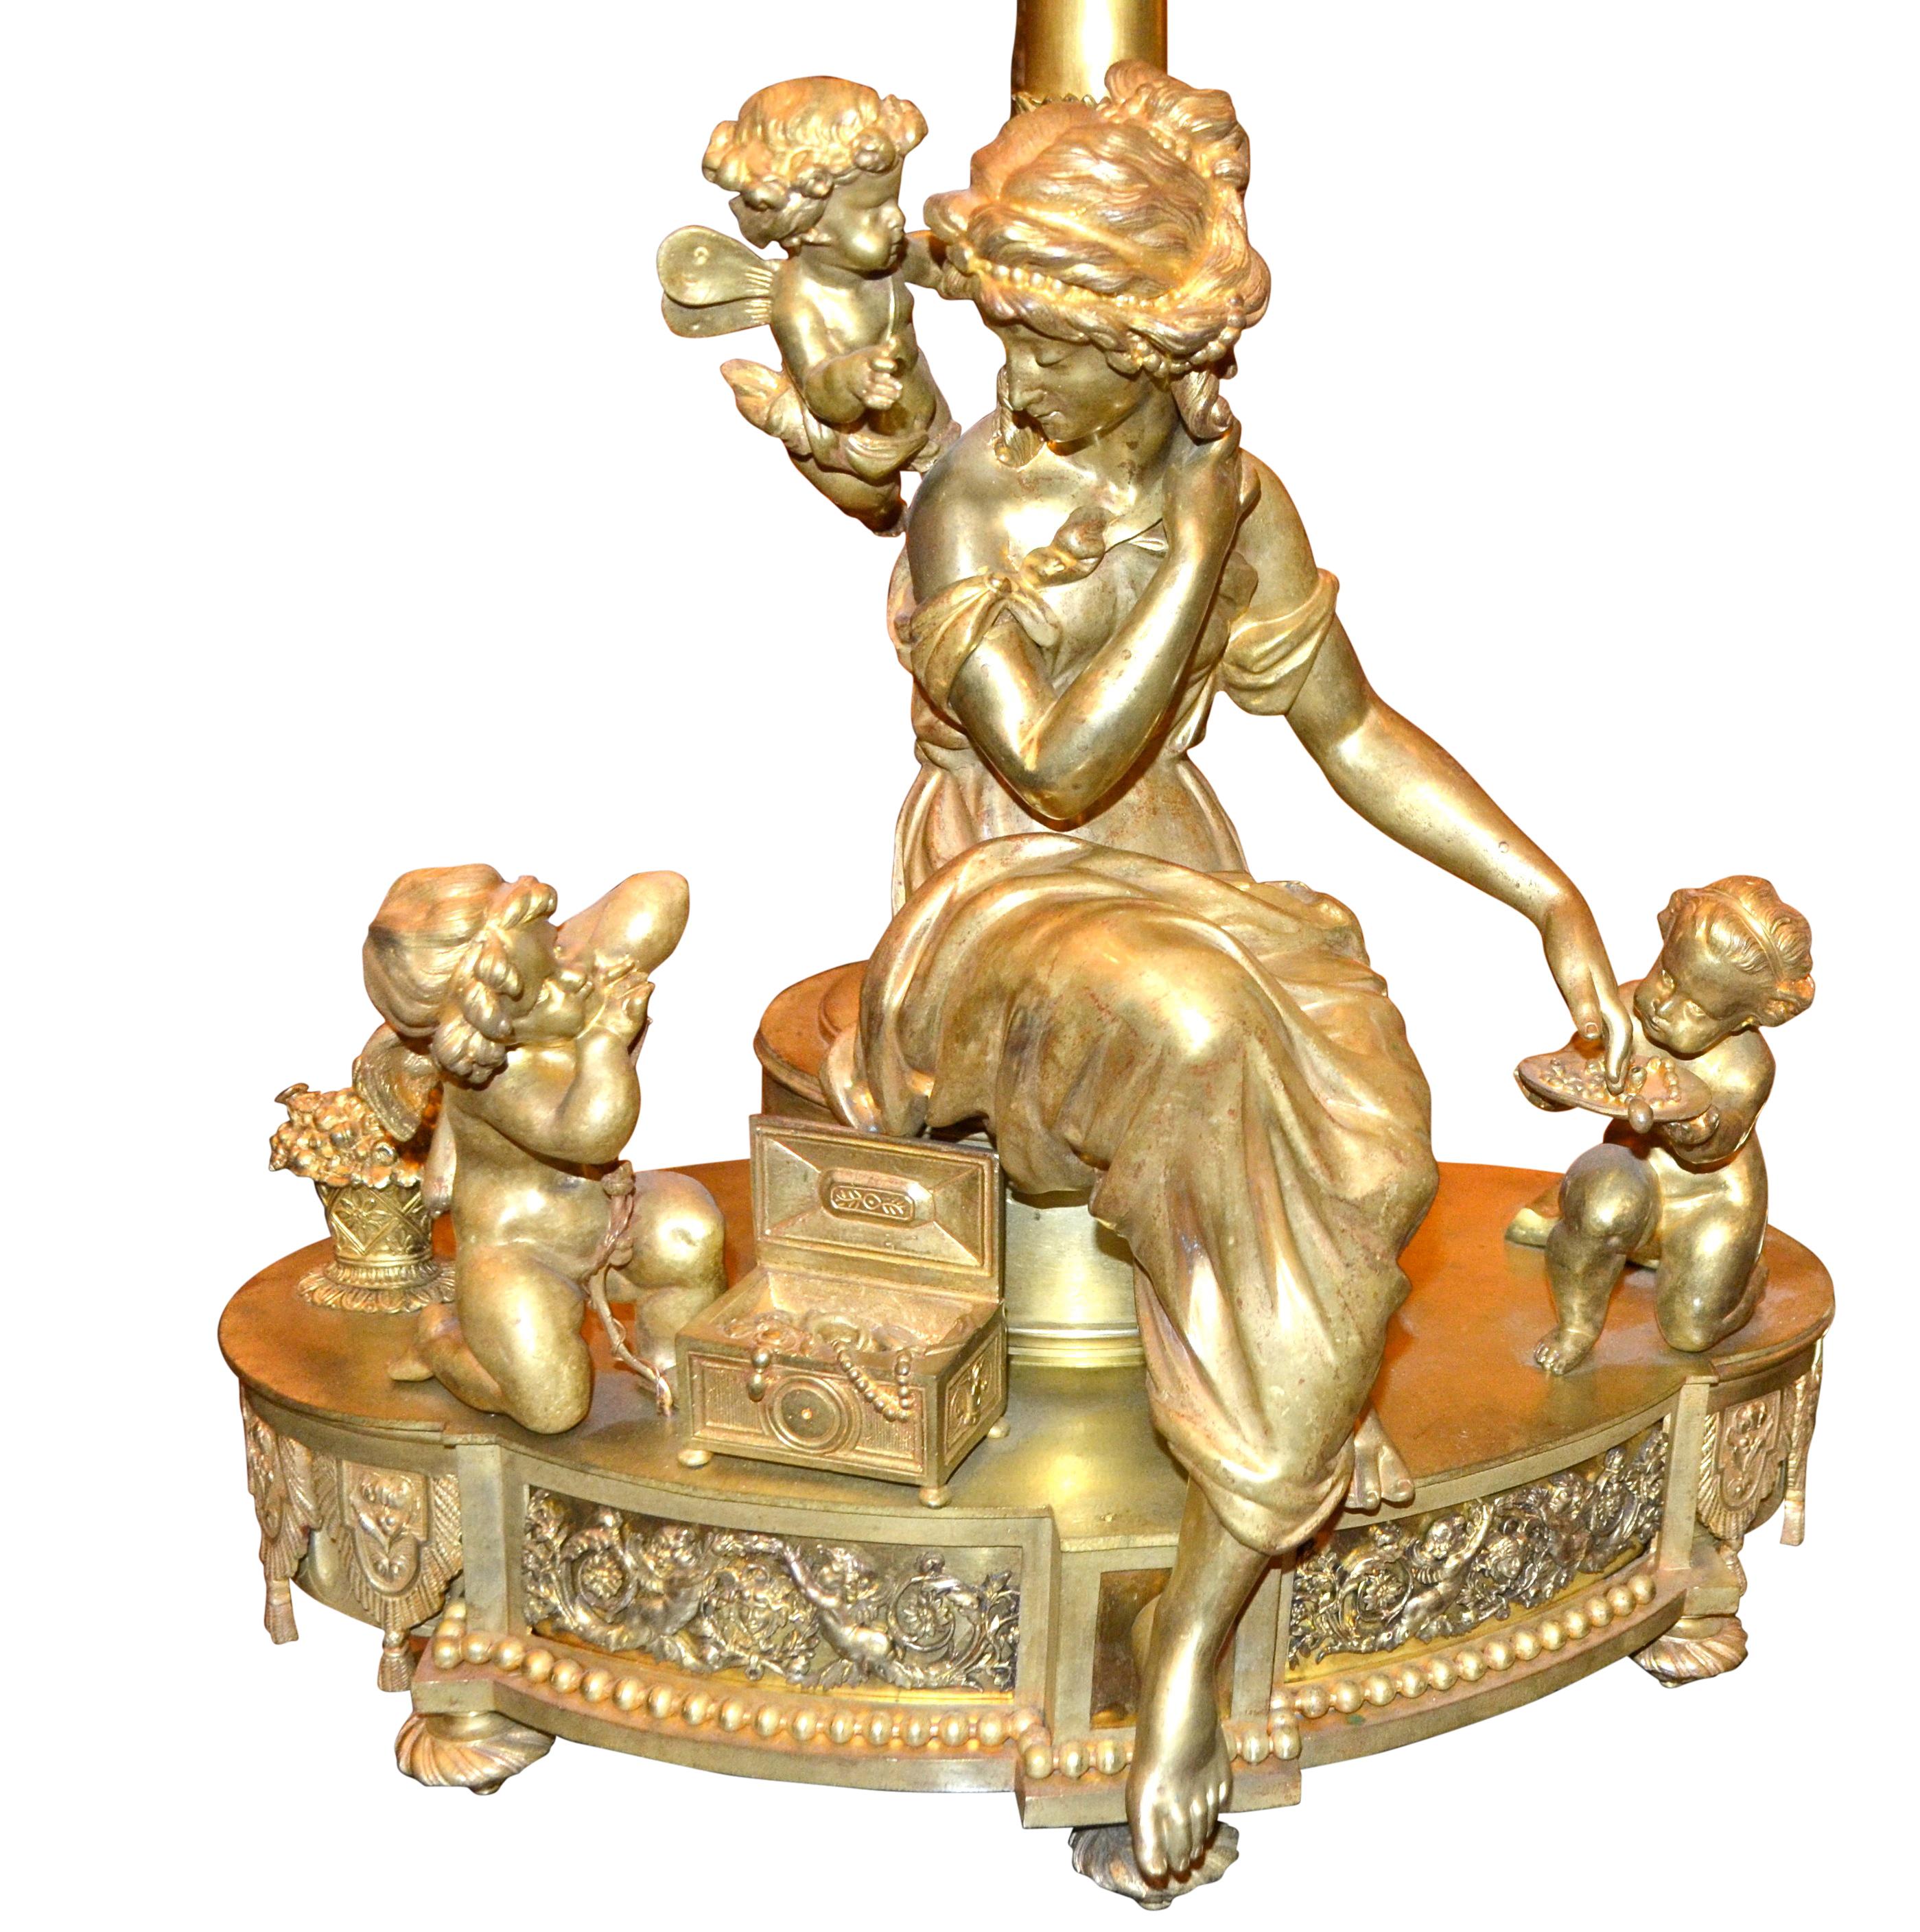 An unusual French gilt bronze candelabra, now wired as a lamp, combining Louis XVI and late Empire styles. An elegantly draped young lady sits beside her open jewellery box with three putti beside and leaning over her. Behind her rises an empire